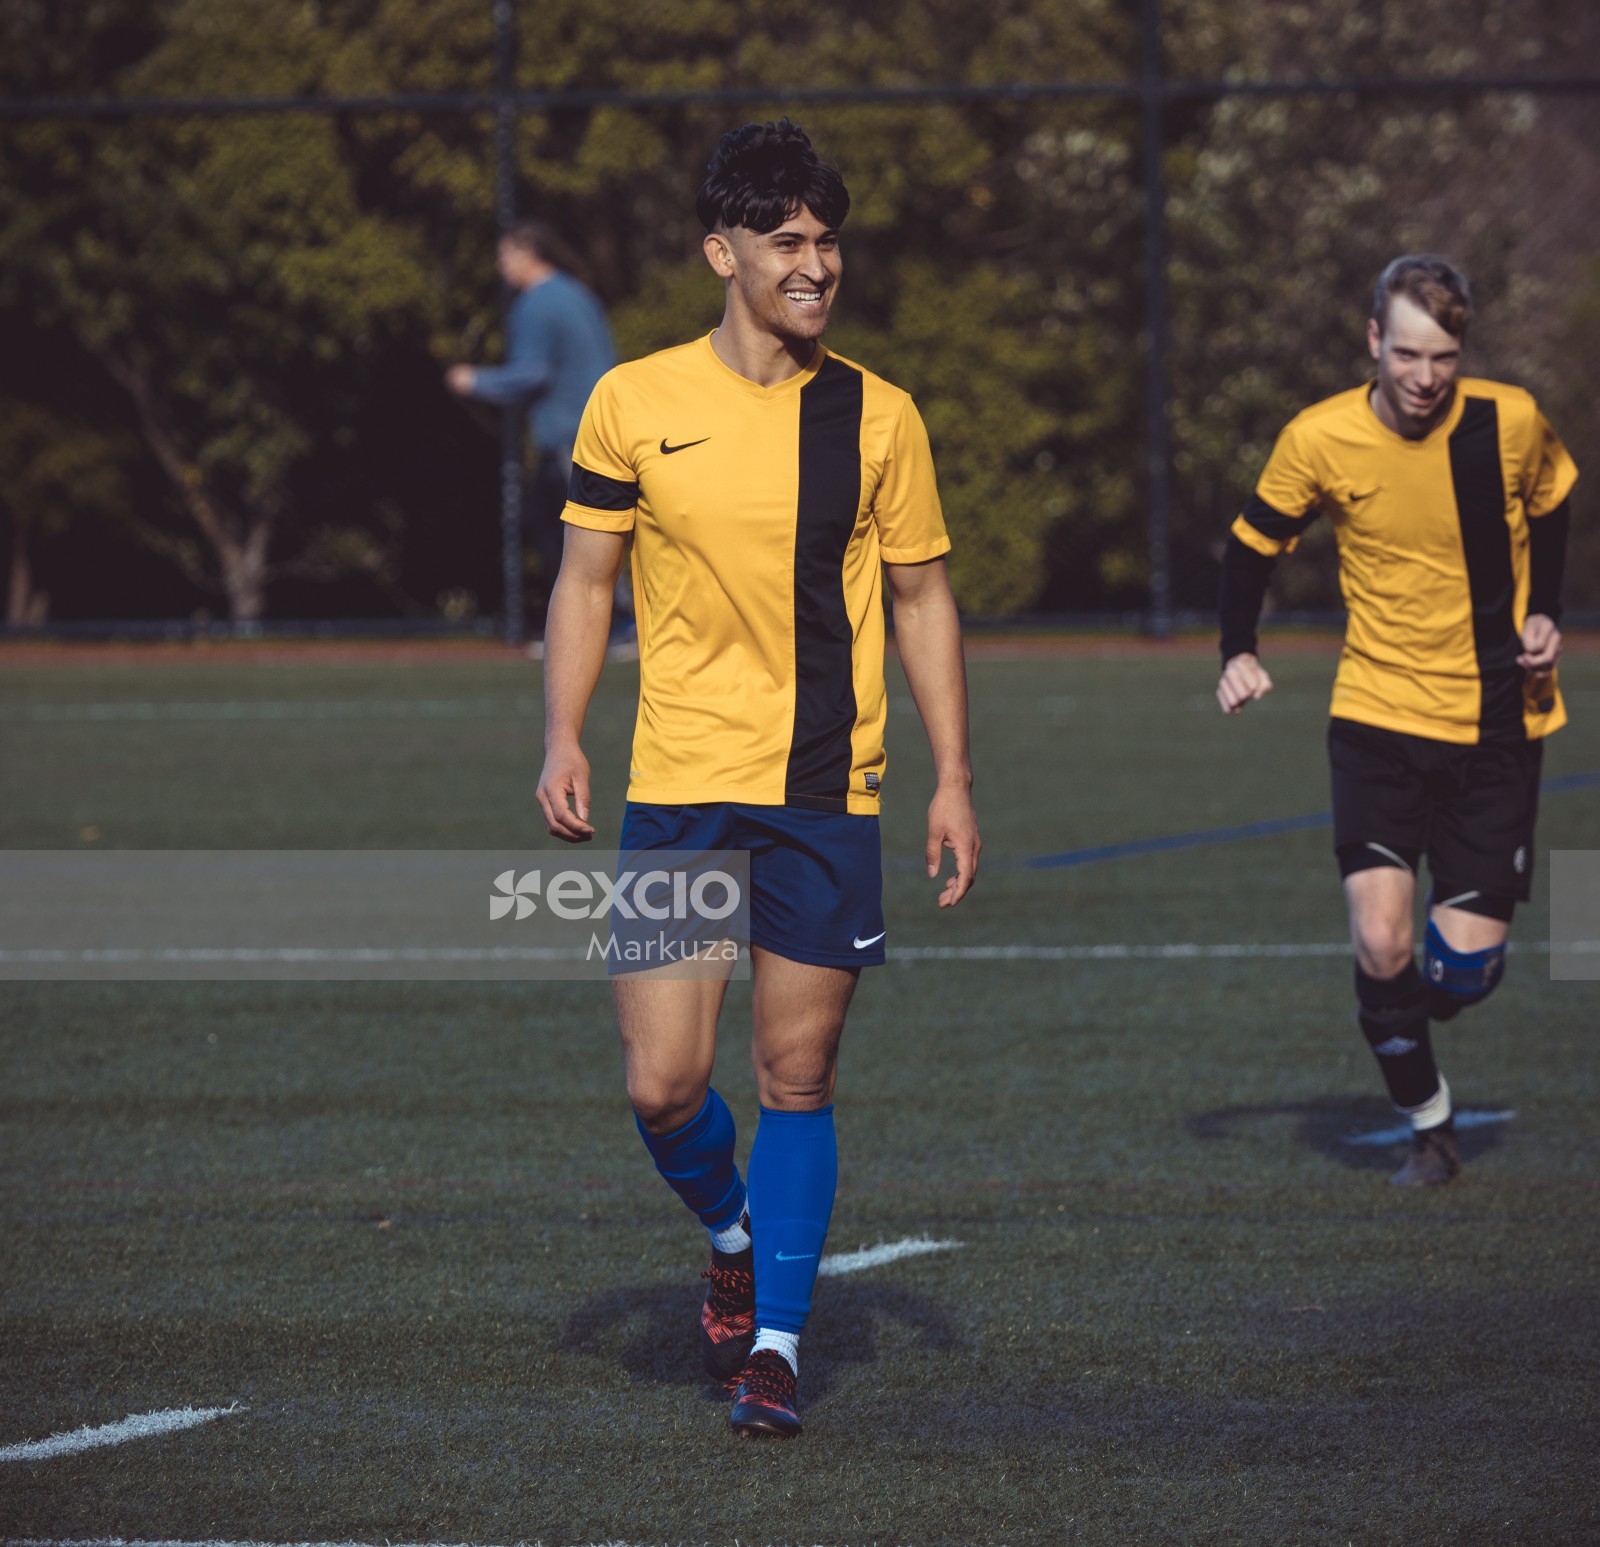 Player in yellow Nike shirt blue shorts and socks smiling - Sports Zone sunday league